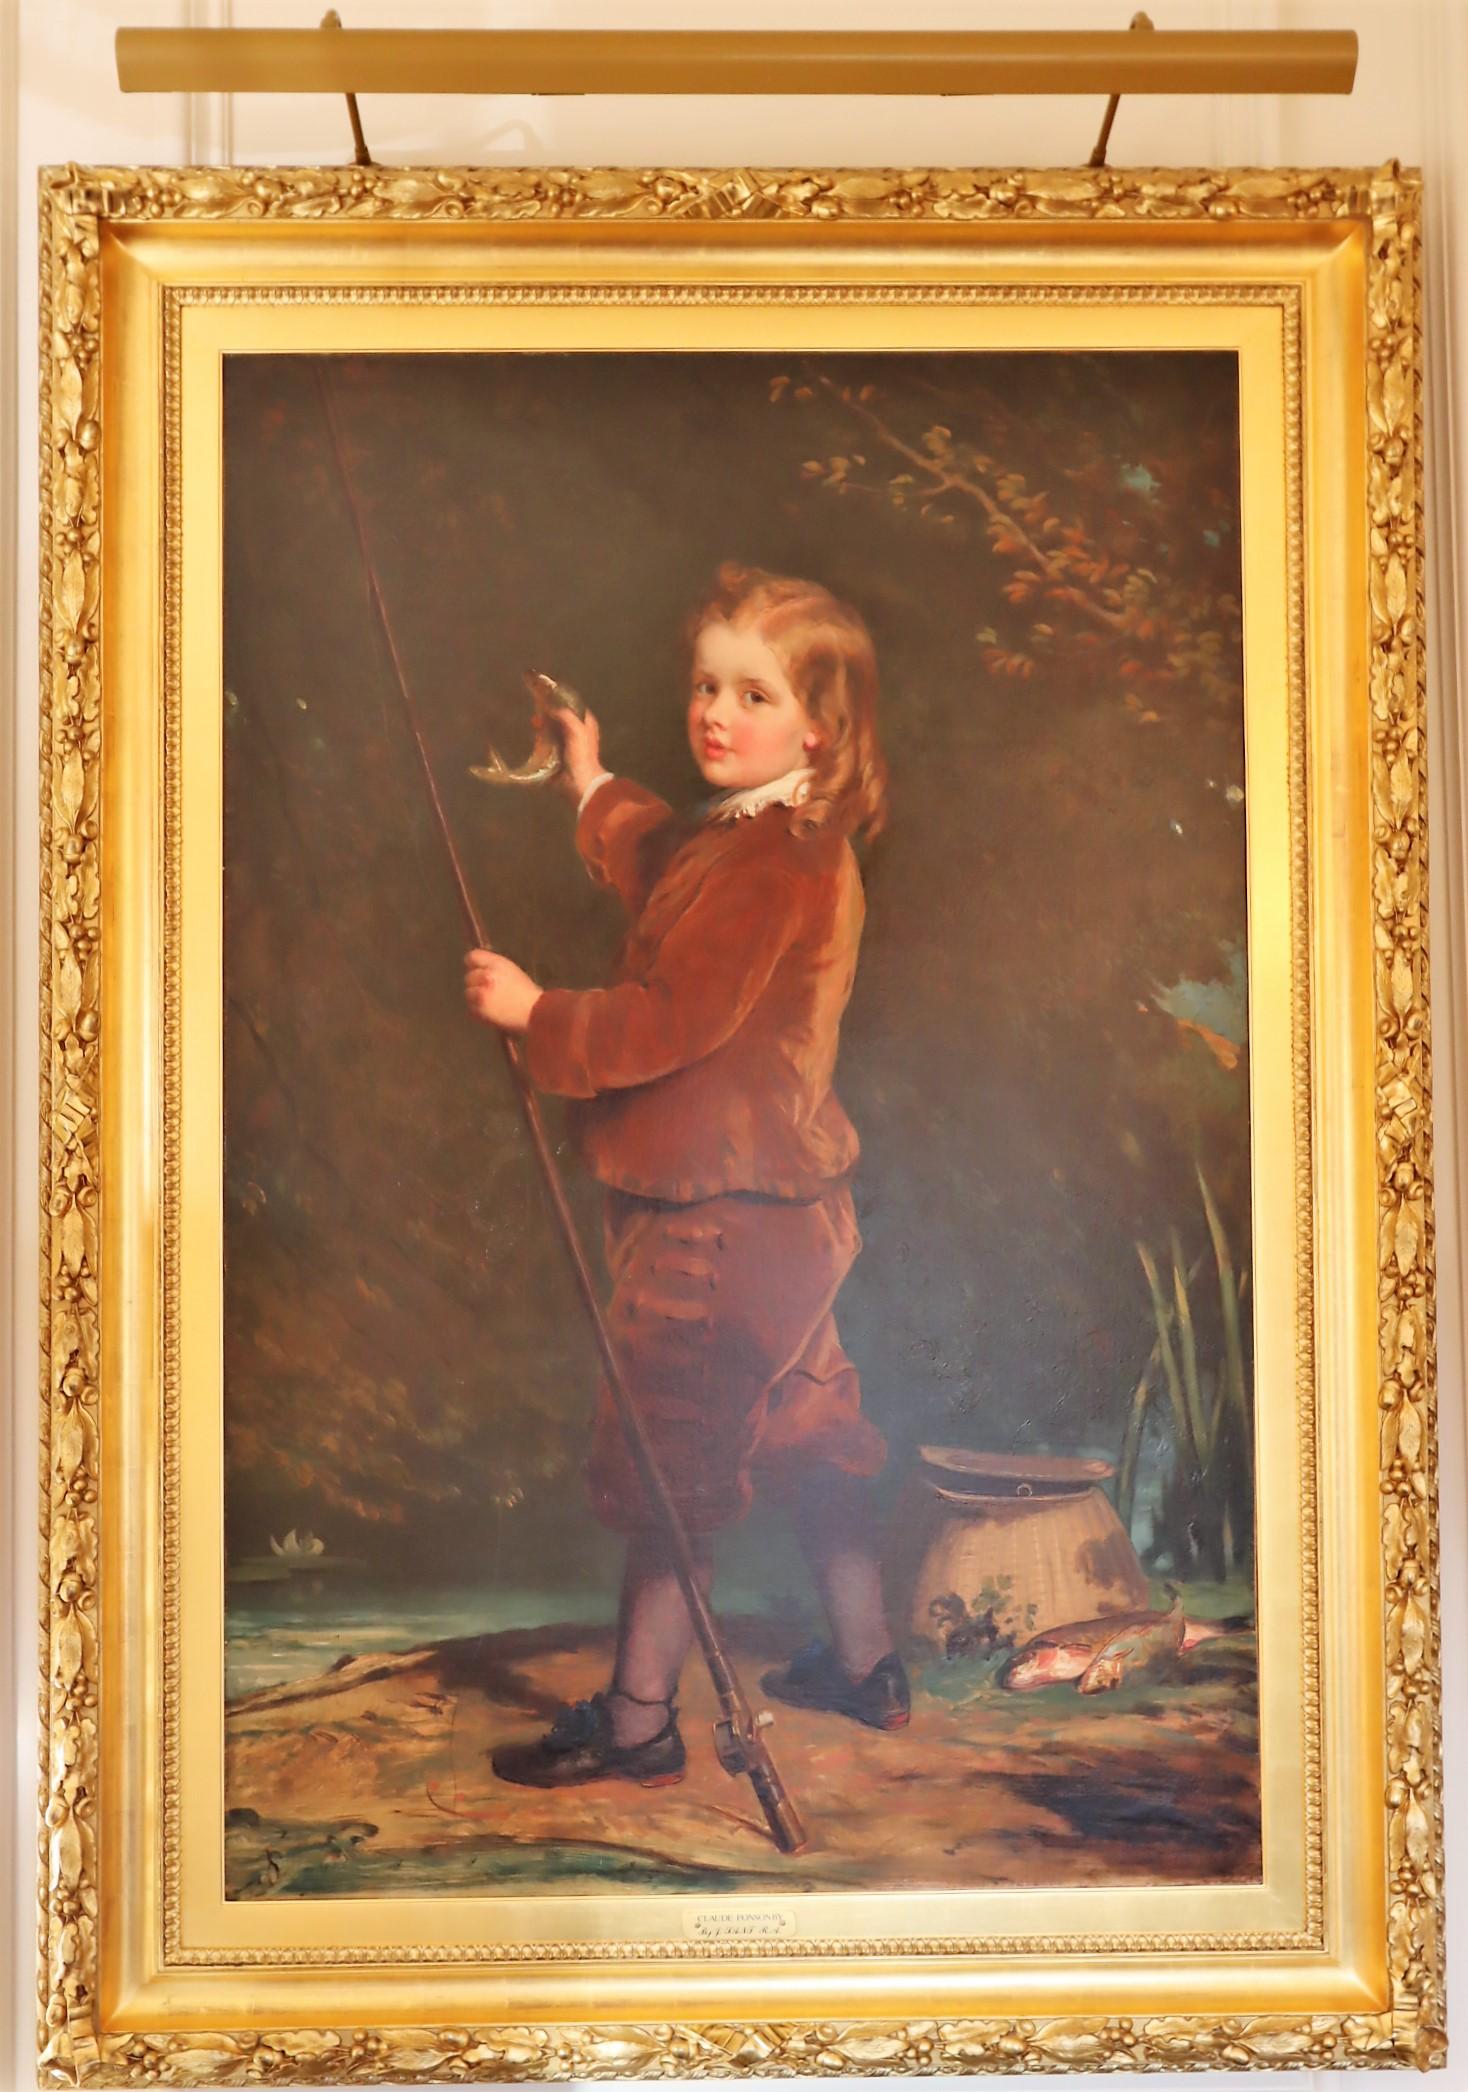 'Claude Posonby' Boy Fishing - Painting by James Sant